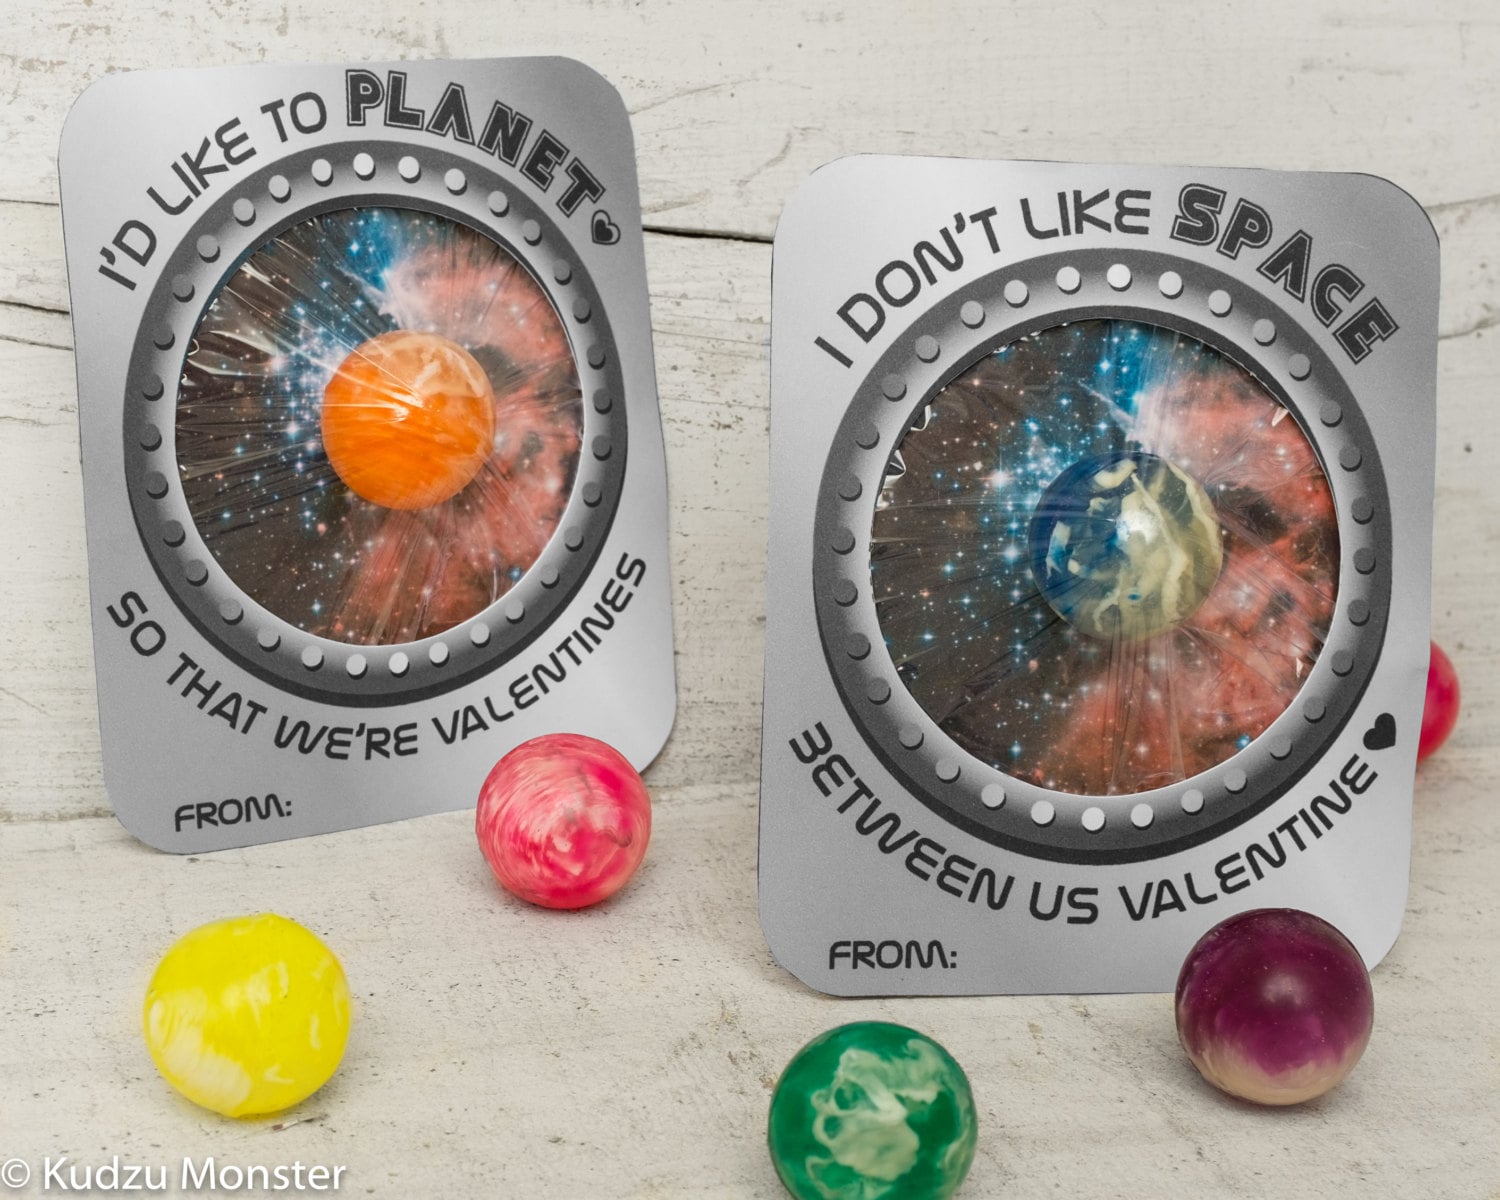 Planet Bouncy Ball,9 Planets In The Solar System Party Bags